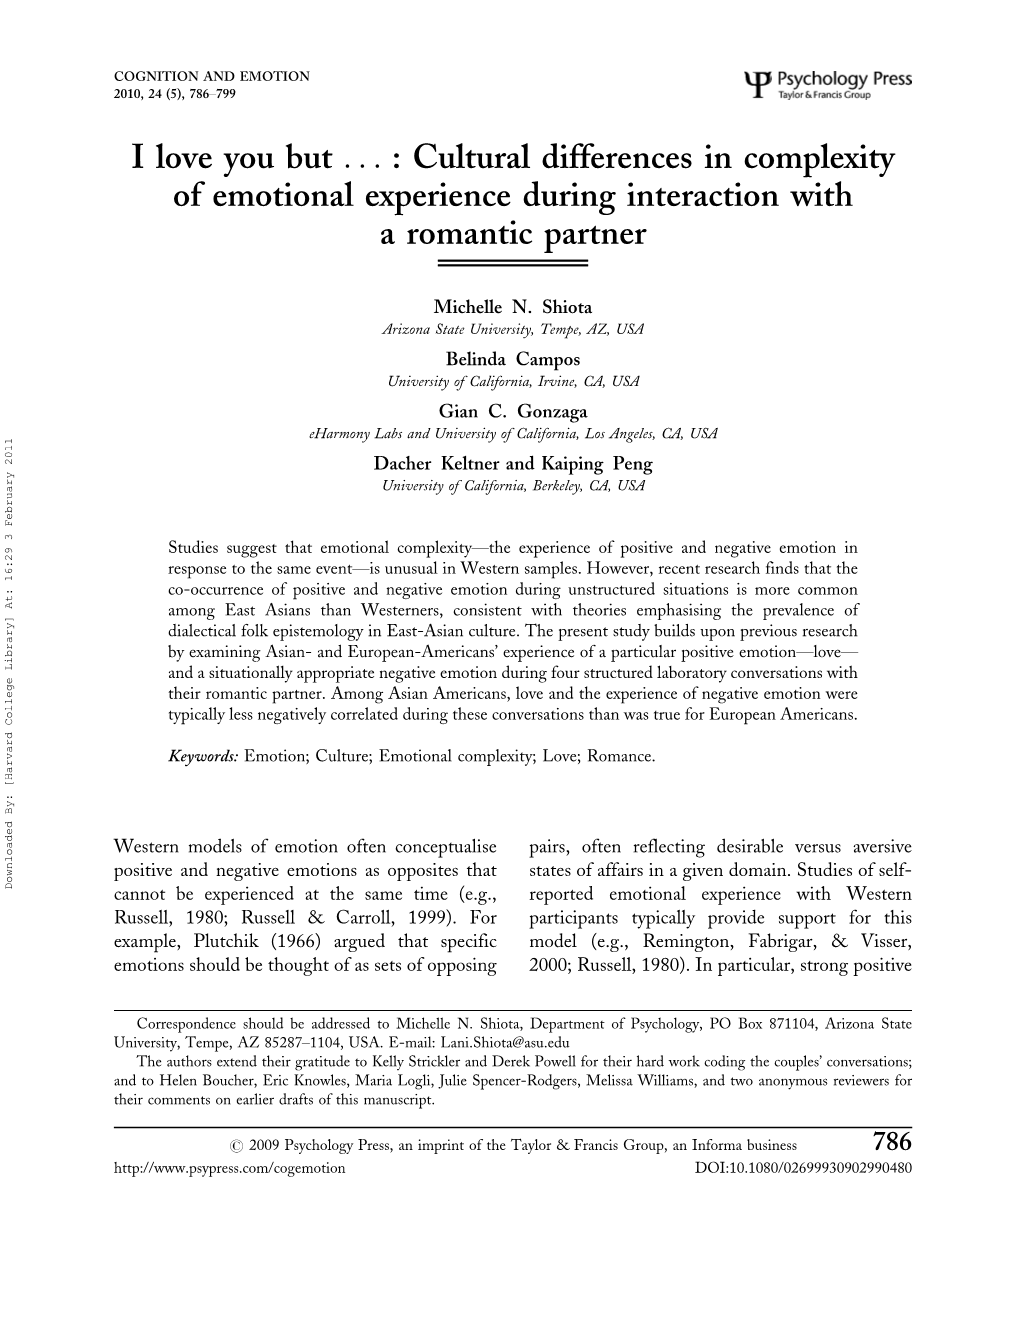 I Love You but ... : Cultural Differences in Complexity of Emotional Experience During Interaction with a Romantic Partner